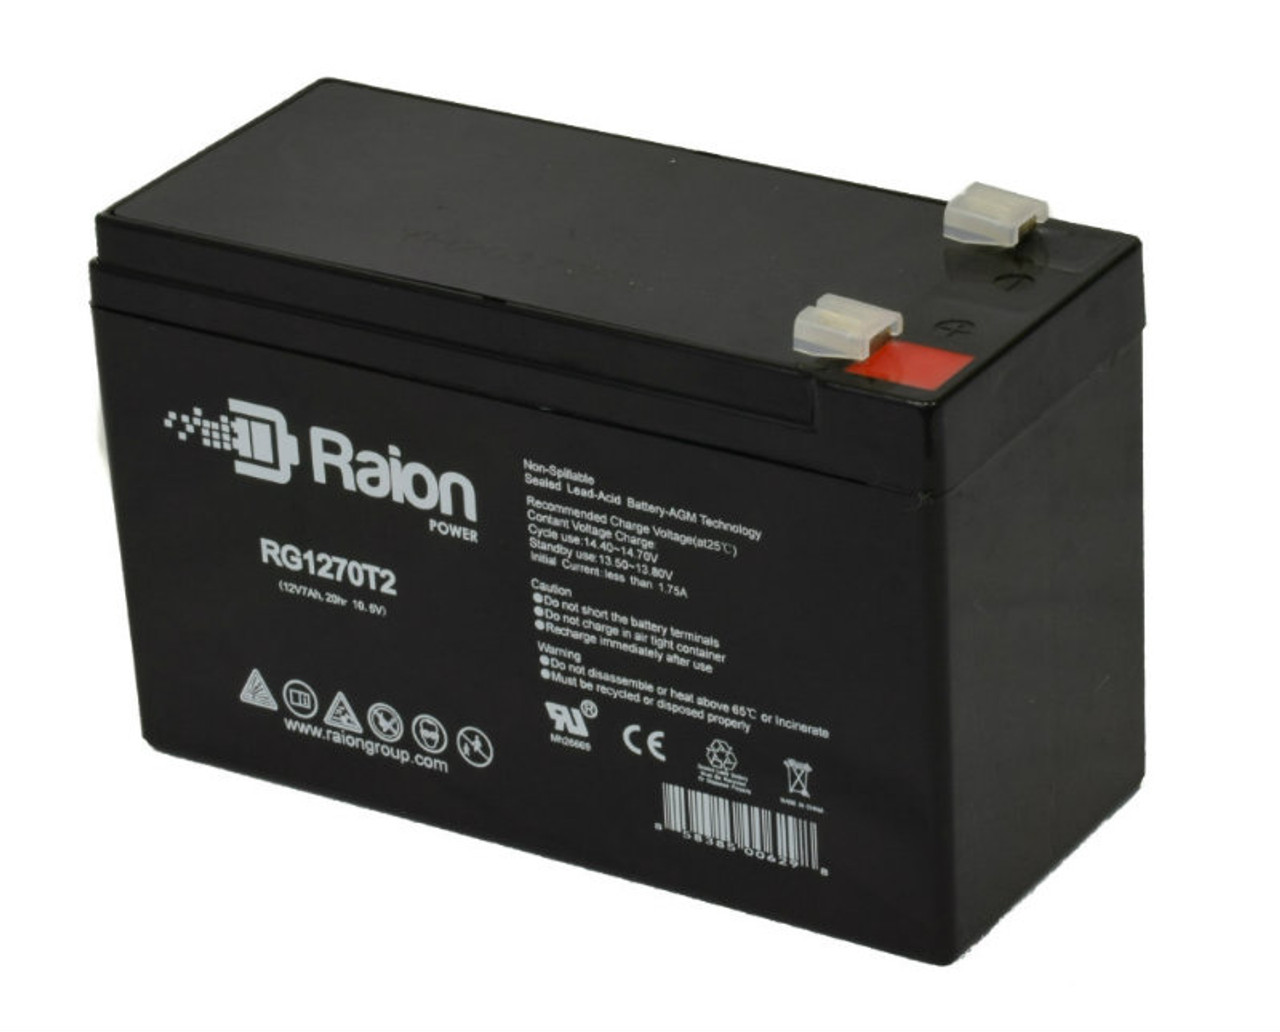 Raion Power RG1270T1 12V 7Ah Non-Spillable Replacement Battery for EverExceed AM12-7